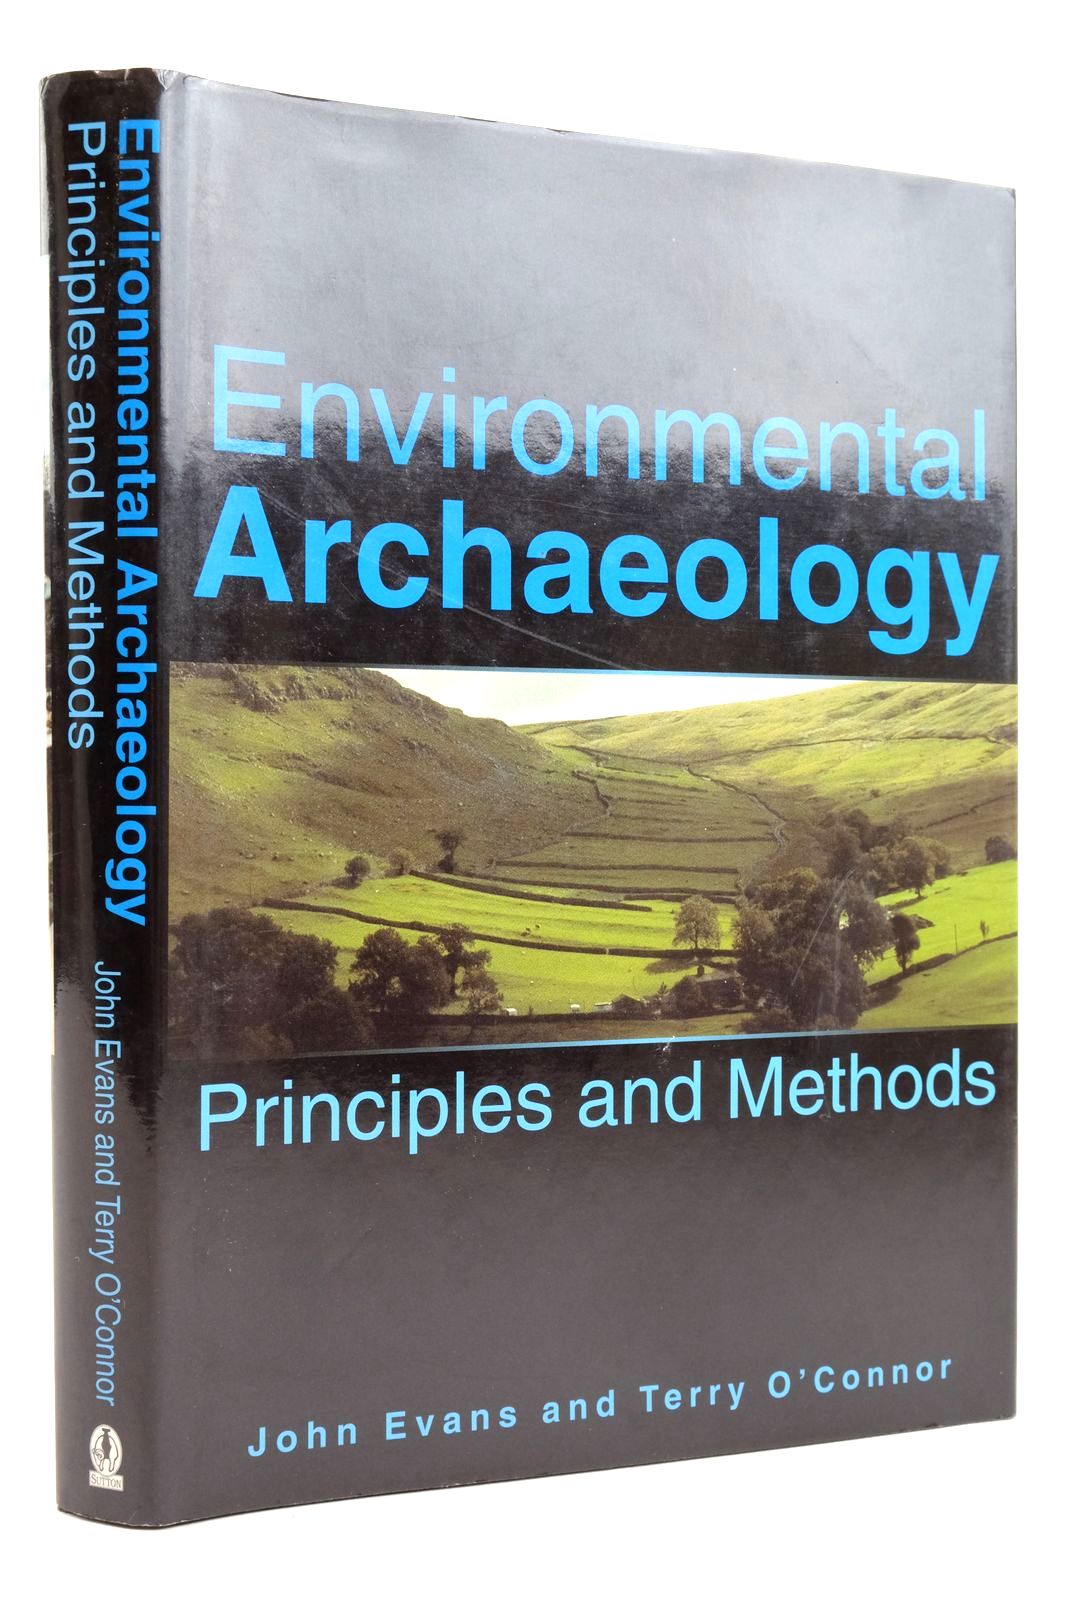 Photo of ENVIRONMENTAL ARCHAEOLOGY: PRINCIPLES AND METHODS written by Evans, John O'Connor, Terry published by Sutton Publishing (STOCK CODE: 2136110)  for sale by Stella & Rose's Books